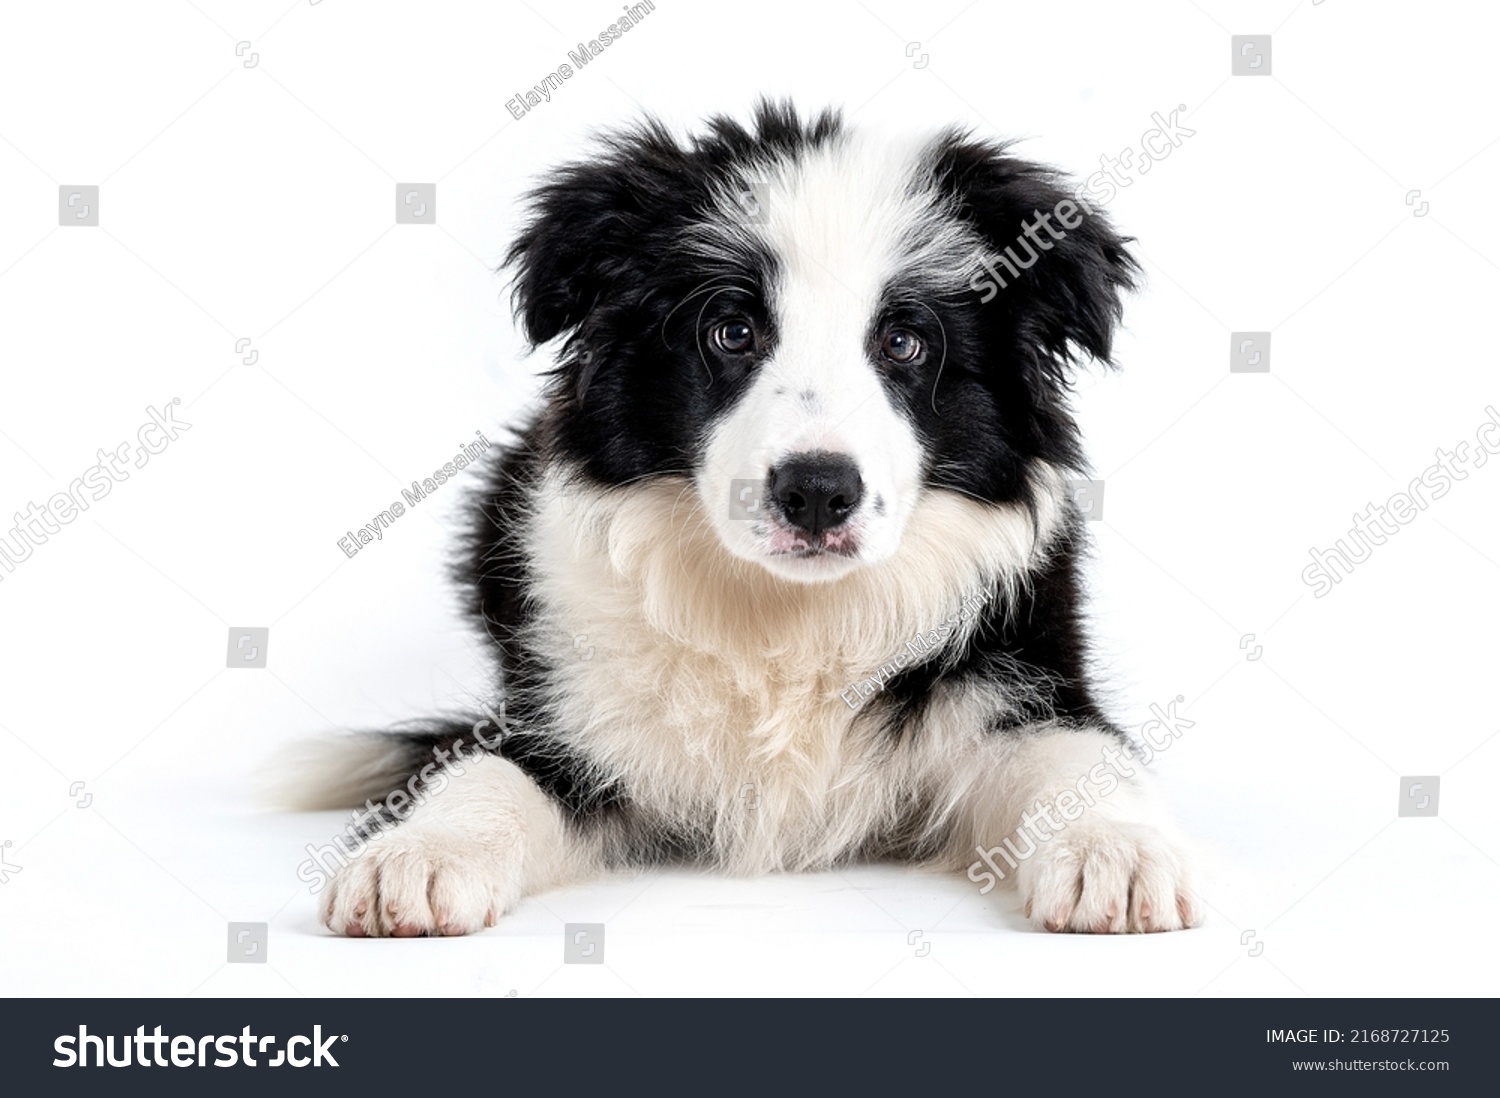 One black and white border collie puppy dog looking and posing for the camera in a studio in a white background #2168727125